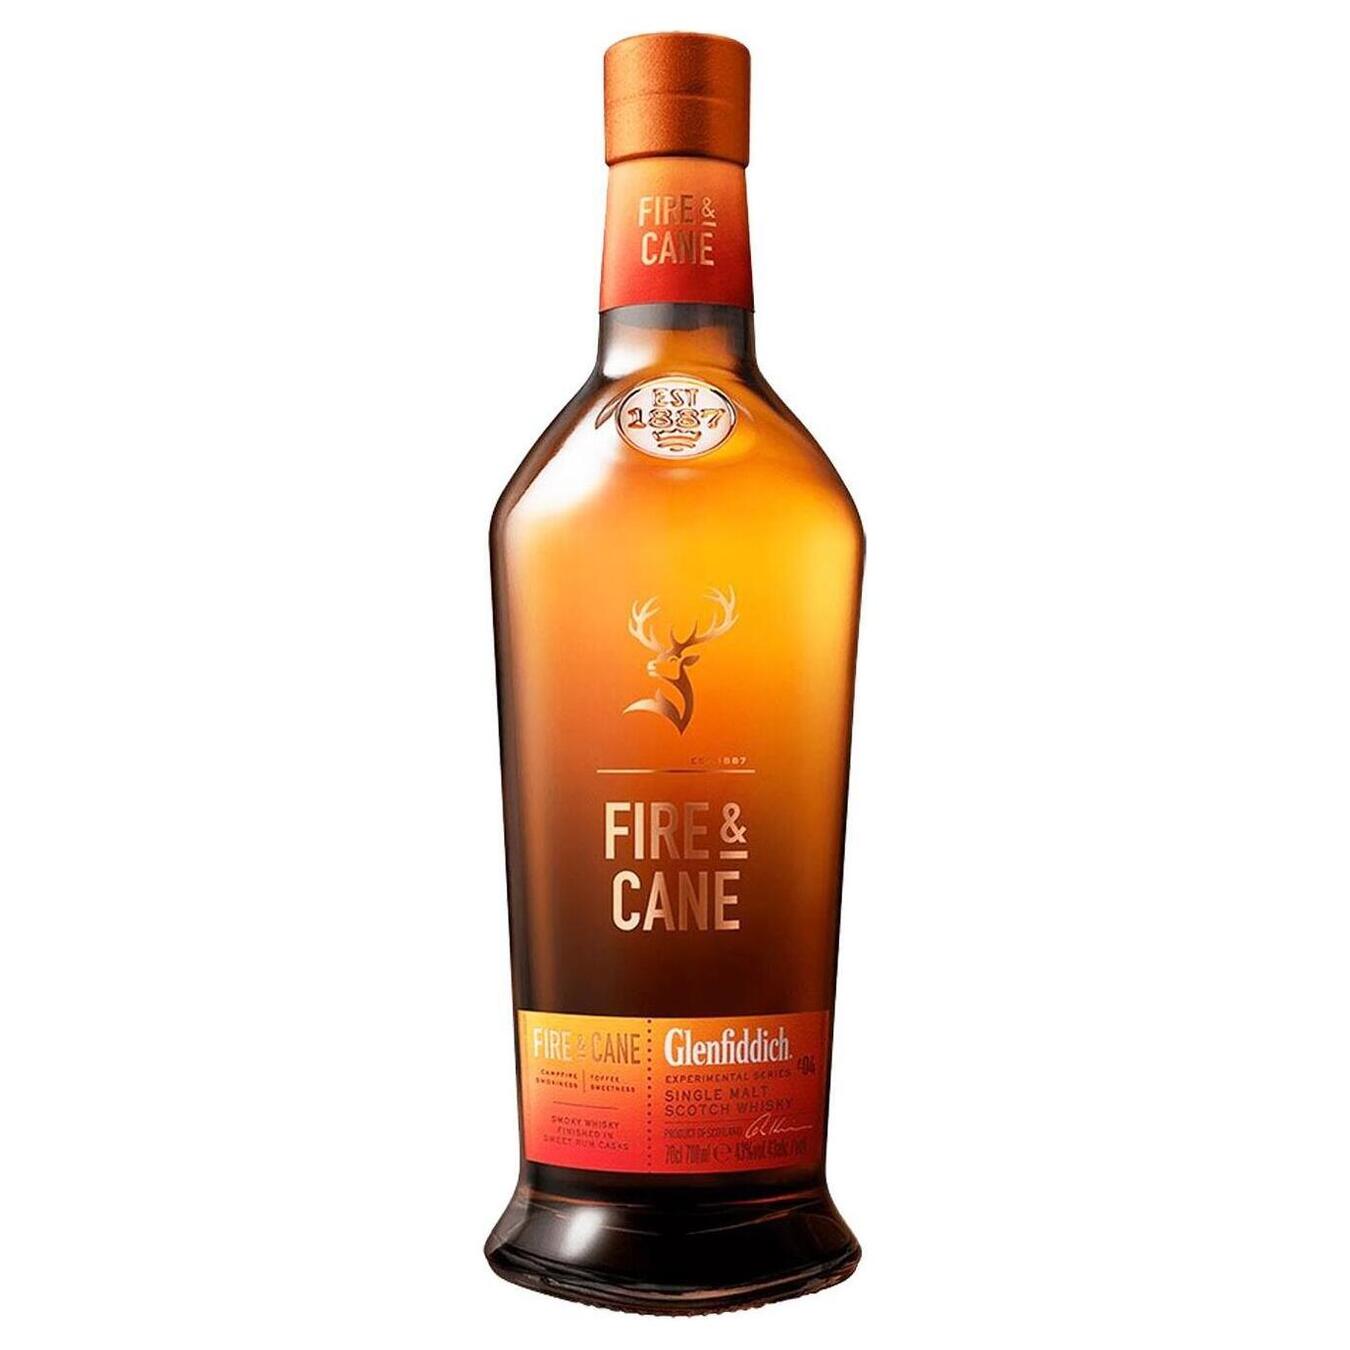 Whiskey Glenfiddich Fire and Cane 8 years 43% 0.7 l